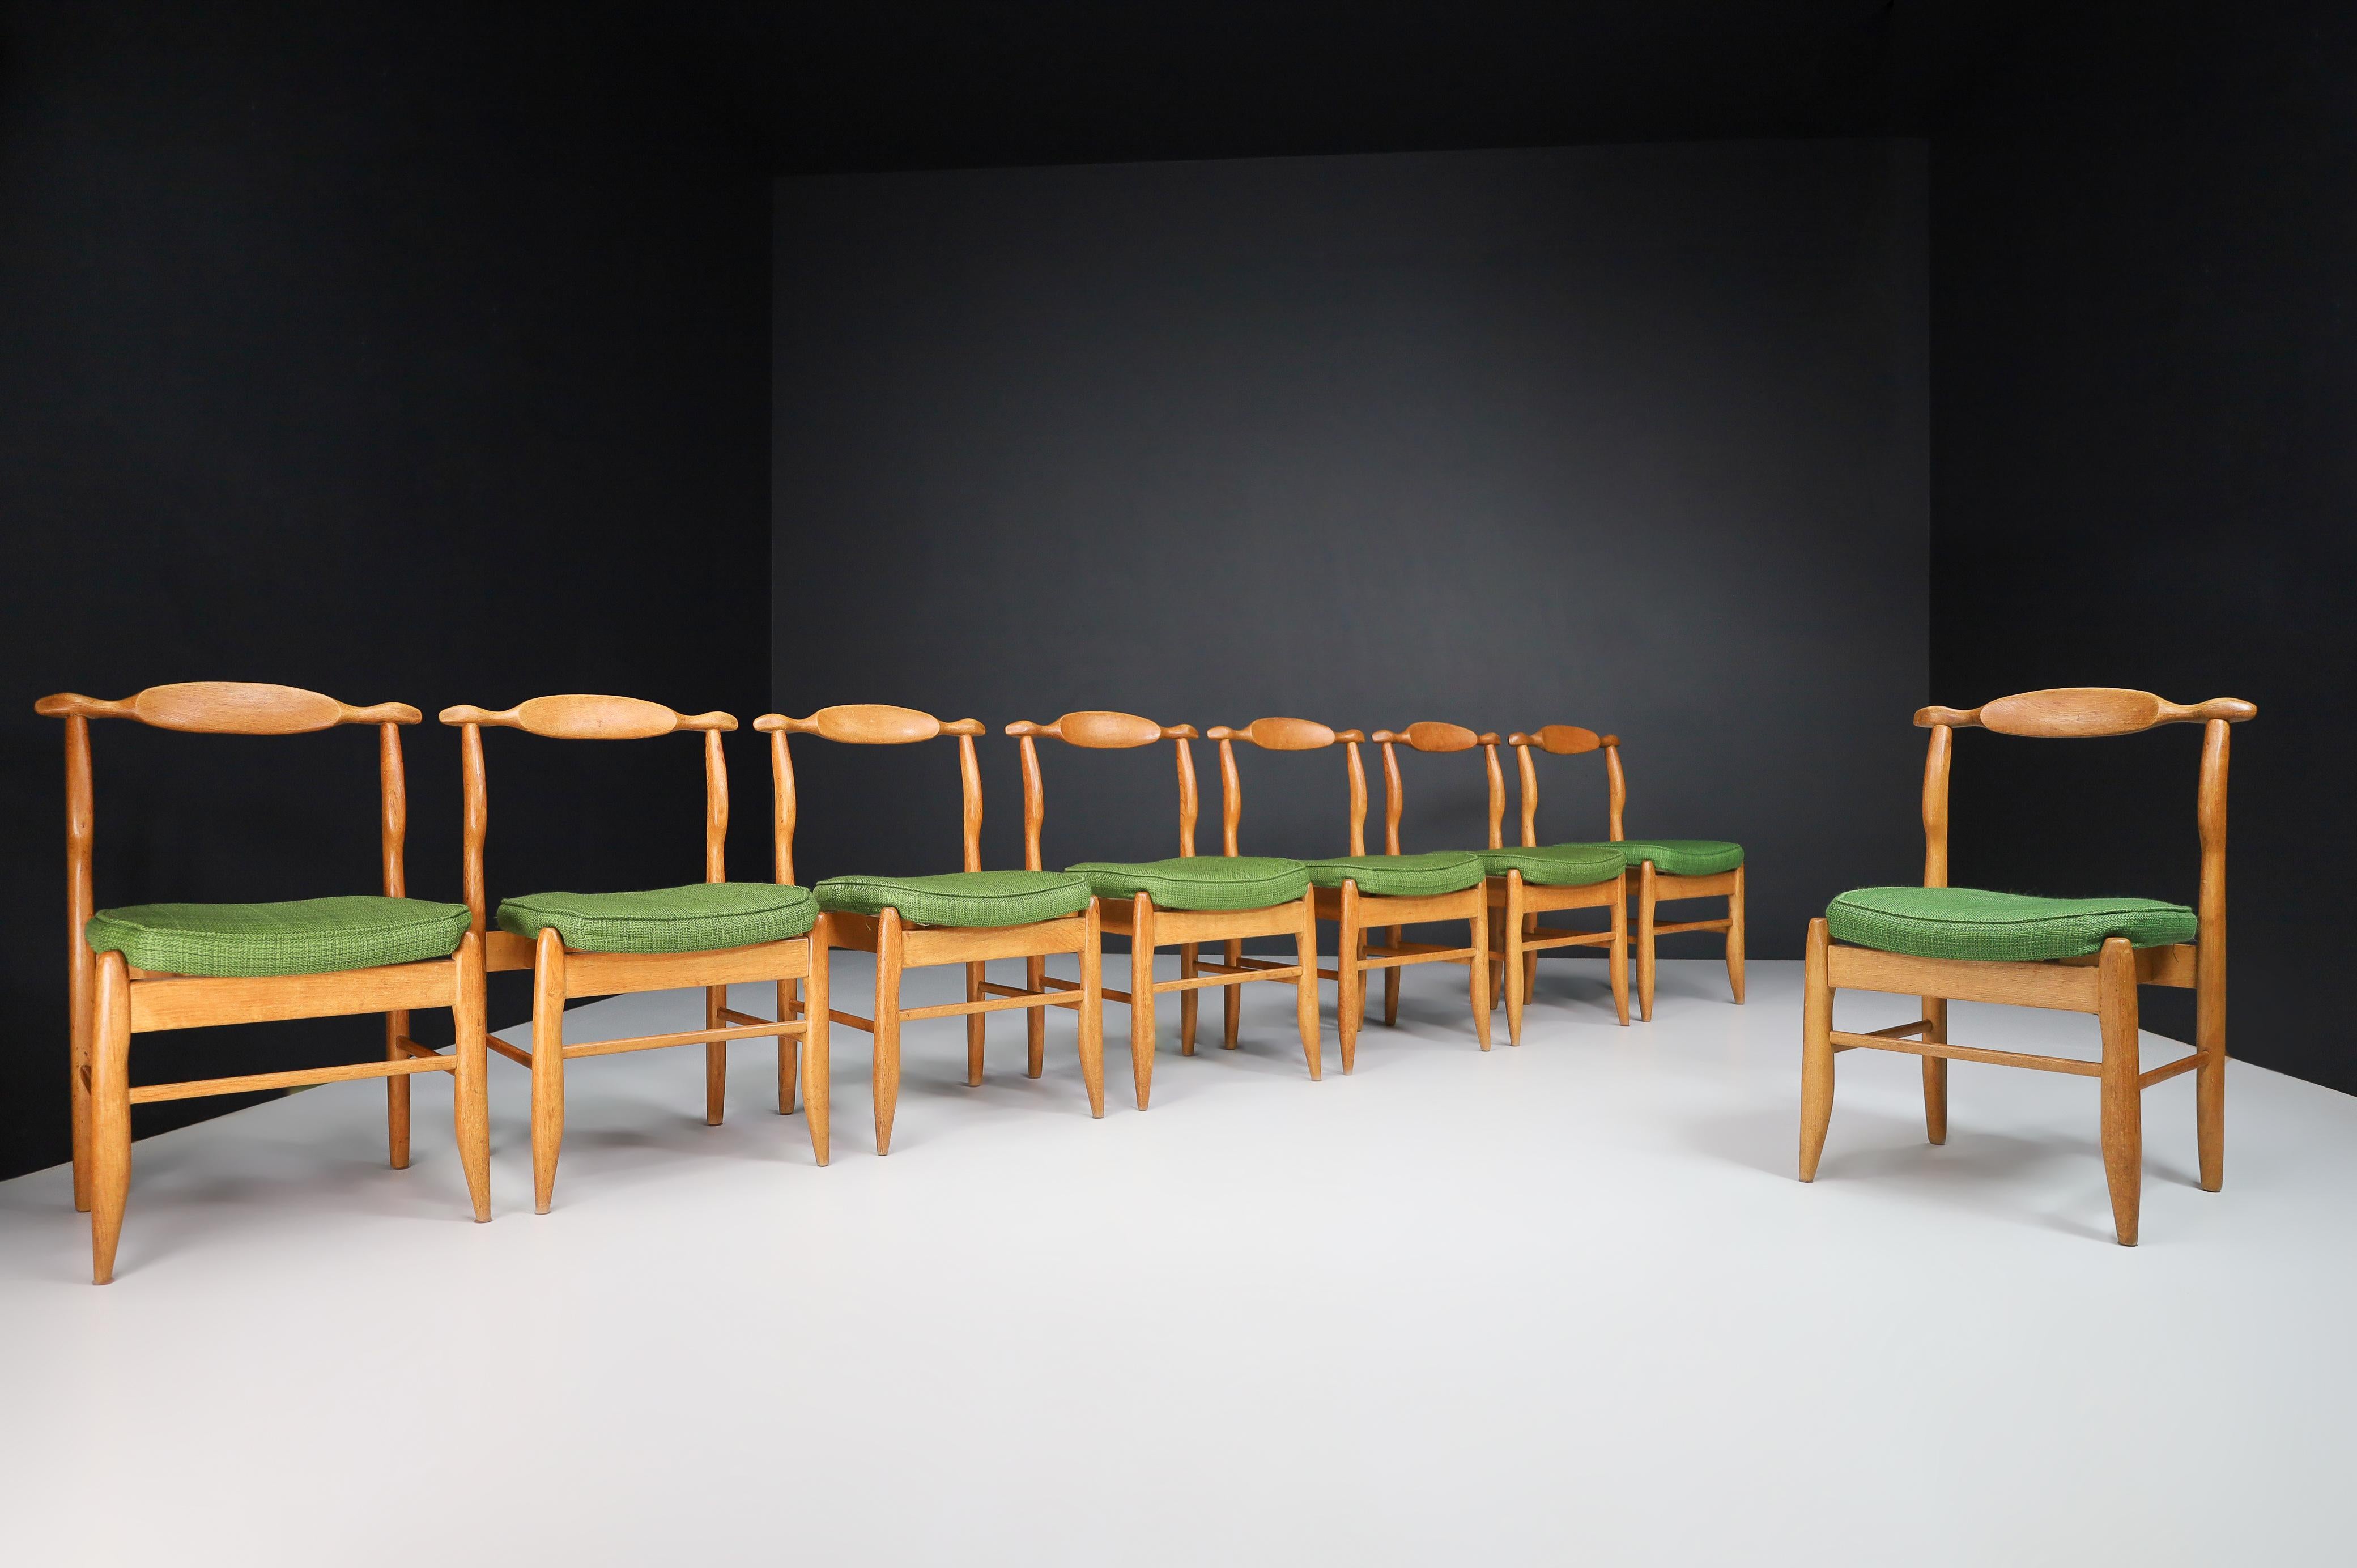 Guillerme & Chambron Set of Eight dining chairs in Oak and Forrest Green Fabric, France 1960s

Guillerme et Chambron, set of eight dining chairs model 'Fumay,' oak, original forest green fabric, France, 1960s. Beautifully shaped chairs in